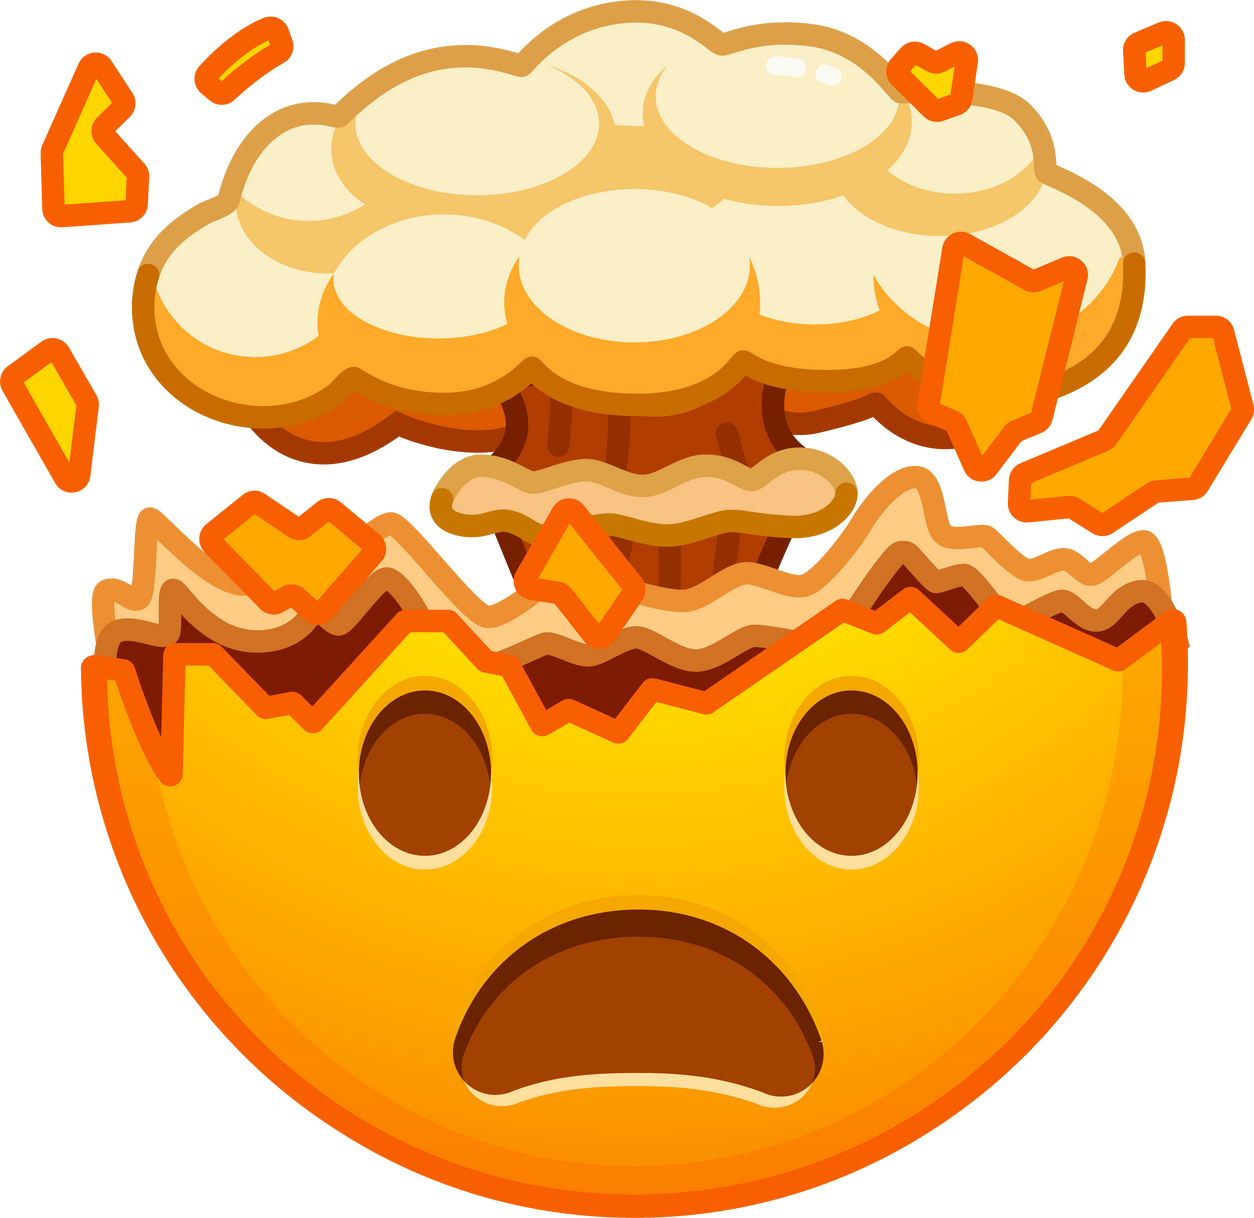 Top quality emoticon. Shocked face with exploding head. Yellow face emoji. Popular element.